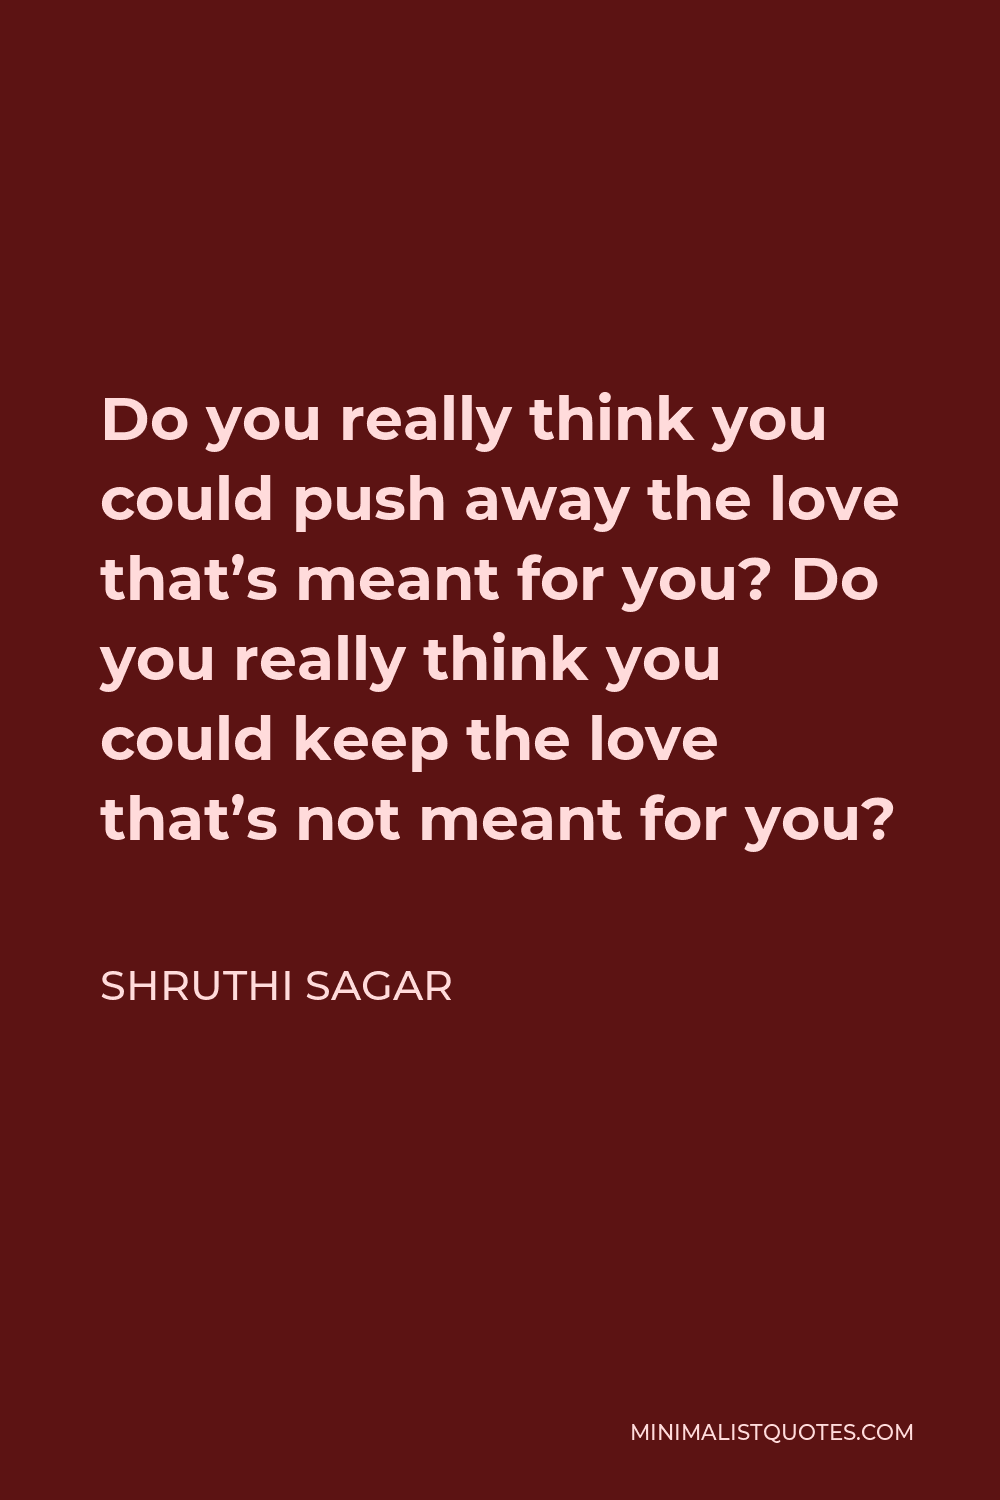 Shruthi Sagar Quote - Do you really think you could push away the love that’s meant for you? Do you really think you could keep the love that’s not meant for you?